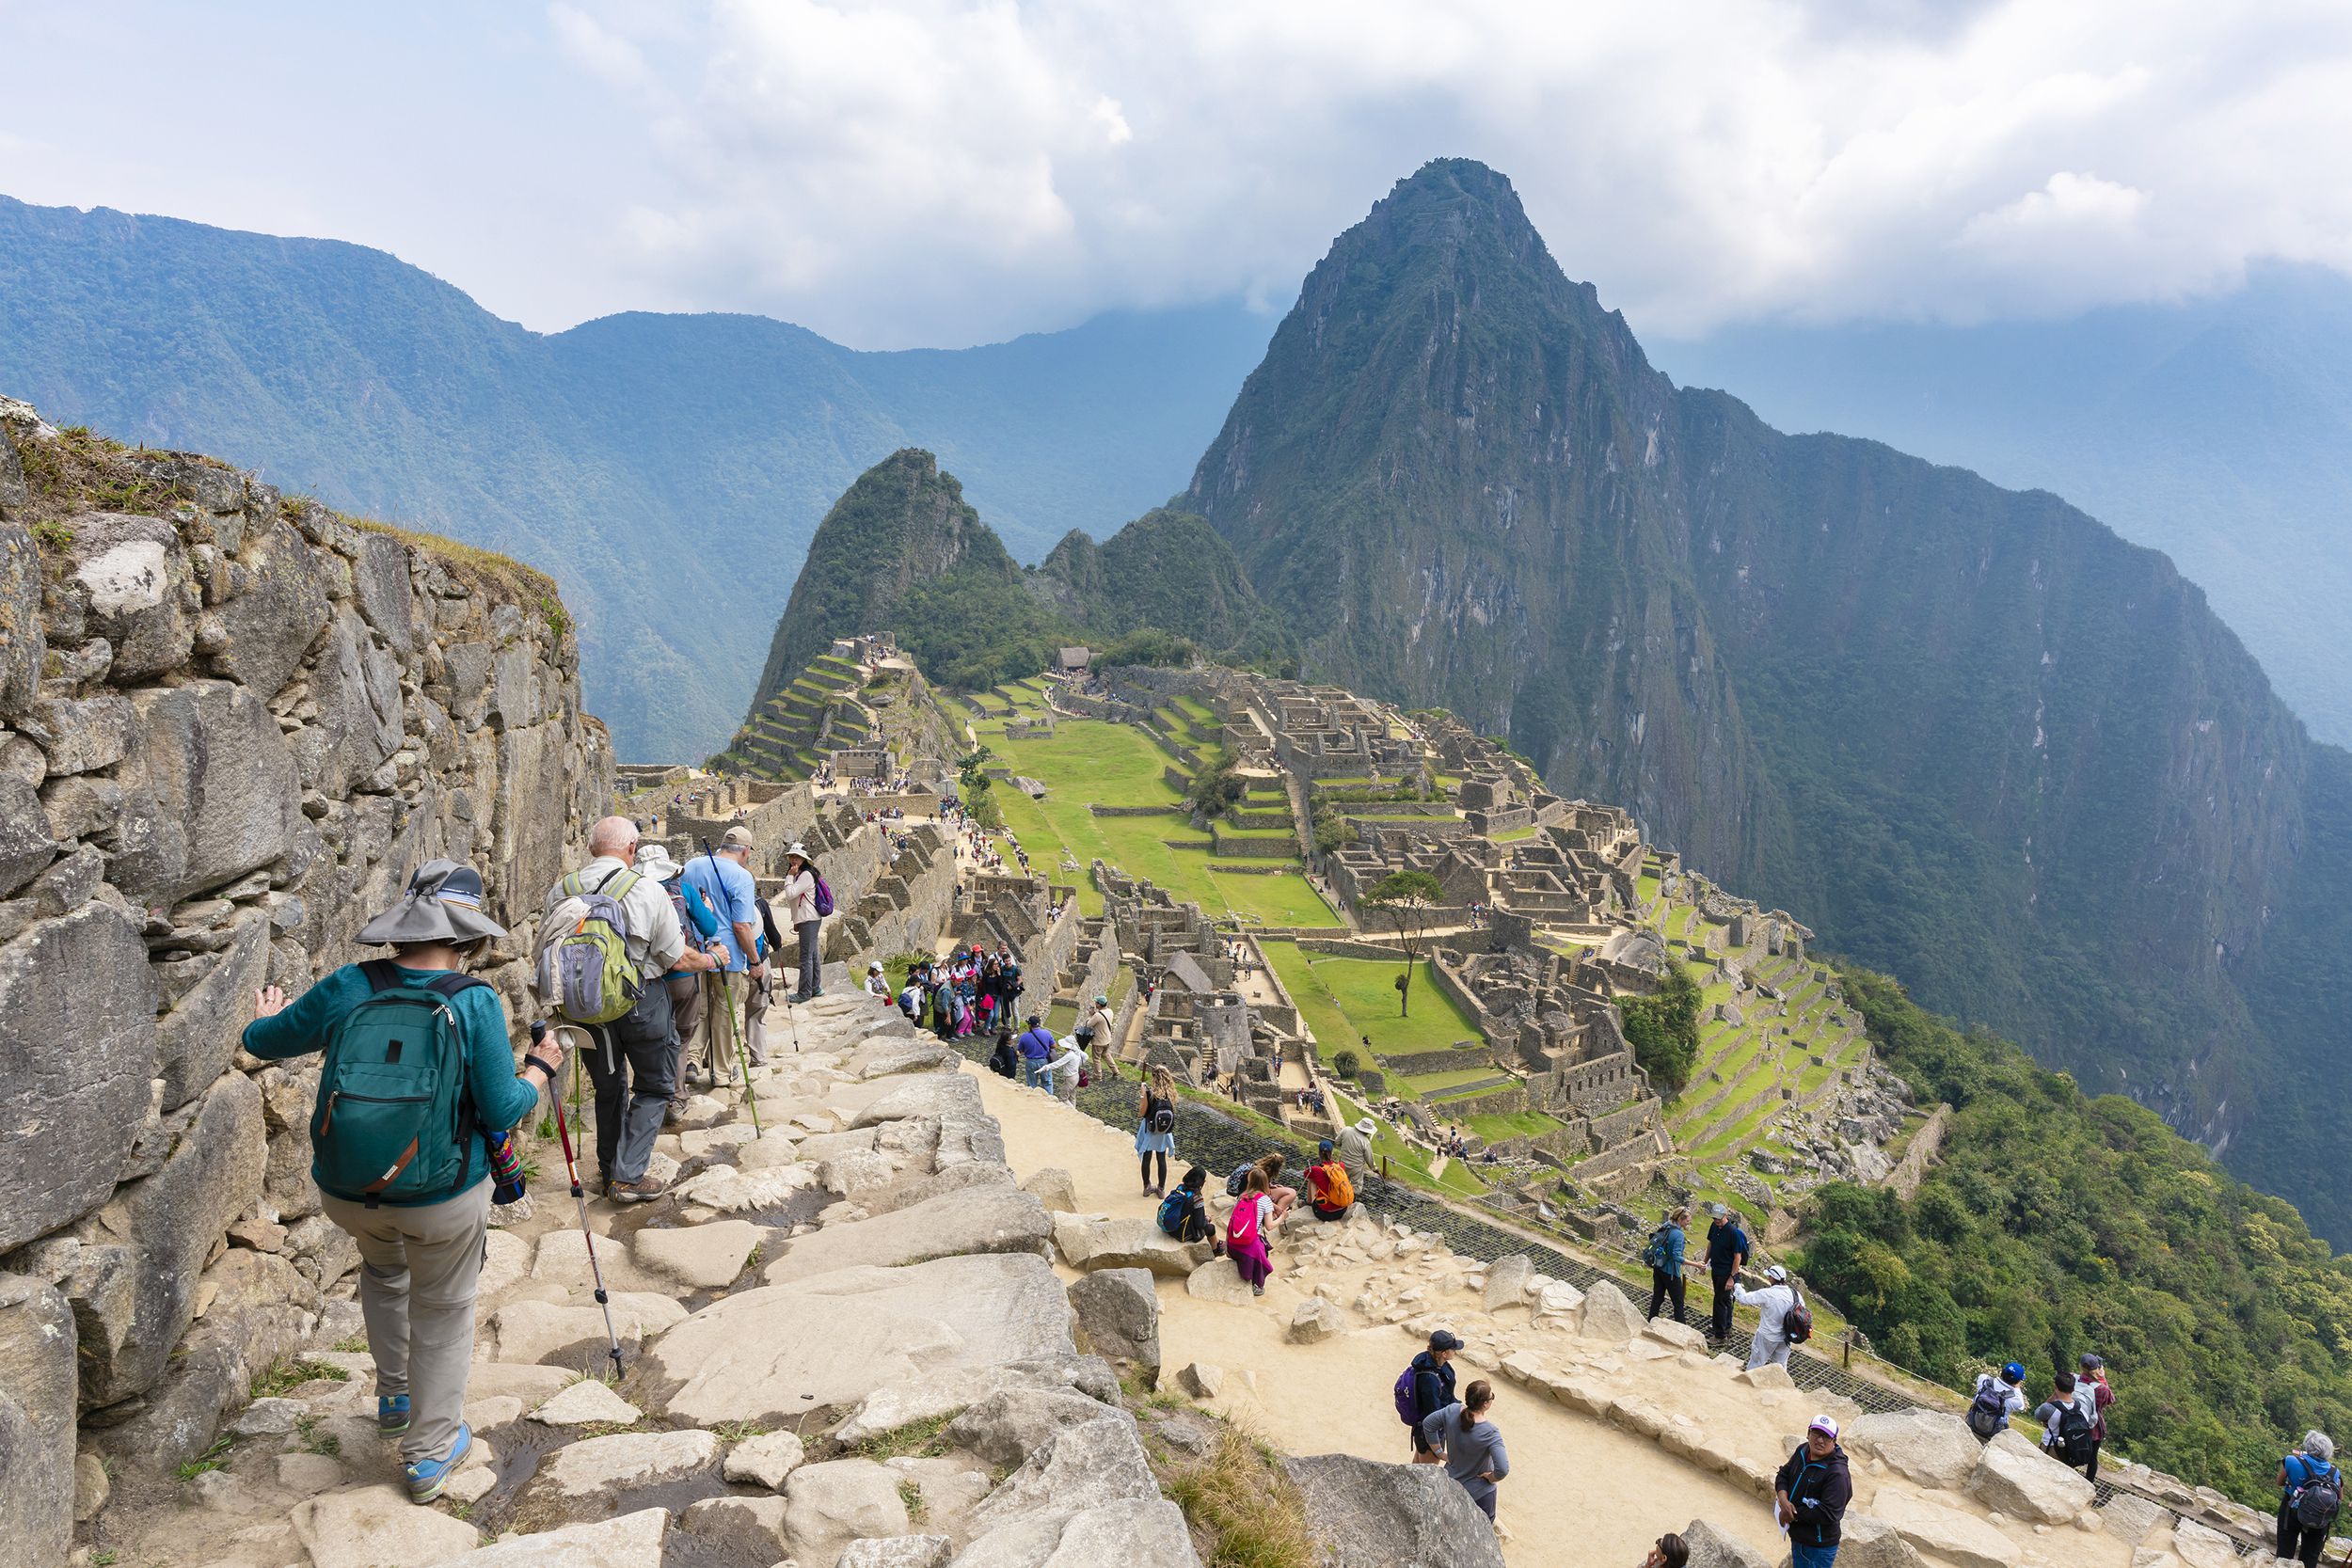 <p>Retirement trips are the perfect excuse to visit some of the most amazing cultural sites around the world, and Machu Picchu — a UNESCO World Heritage Site and one of the Seven Wonders of the World — should be on every adventure traveler's bucket list. Join a <a href="https://www.stridetravel.com/machu-picchu">guided group tour</a> for help planning the trip and a chance to meet new people while visiting the awe-inspiring, ancient Incan citadel and temple set high in the Andes Mountains in Peru. There are <a href="https://www.travelandleisure.com/articles/how-to-travel-to-machu-picchu">many ways to reach the ruins</a>, depending on your fitness level. Active retirees can hike along the Inca Trail to Machu Picchu. Alternatively, take a luxurious and scenic train ride from Cusco via a rail service like the Pullman-style train <a href="https://www.belmond.com/trains/south-america/peru/belmond-hiram-bingham">Belmond Hiram Bingham.</a></p>